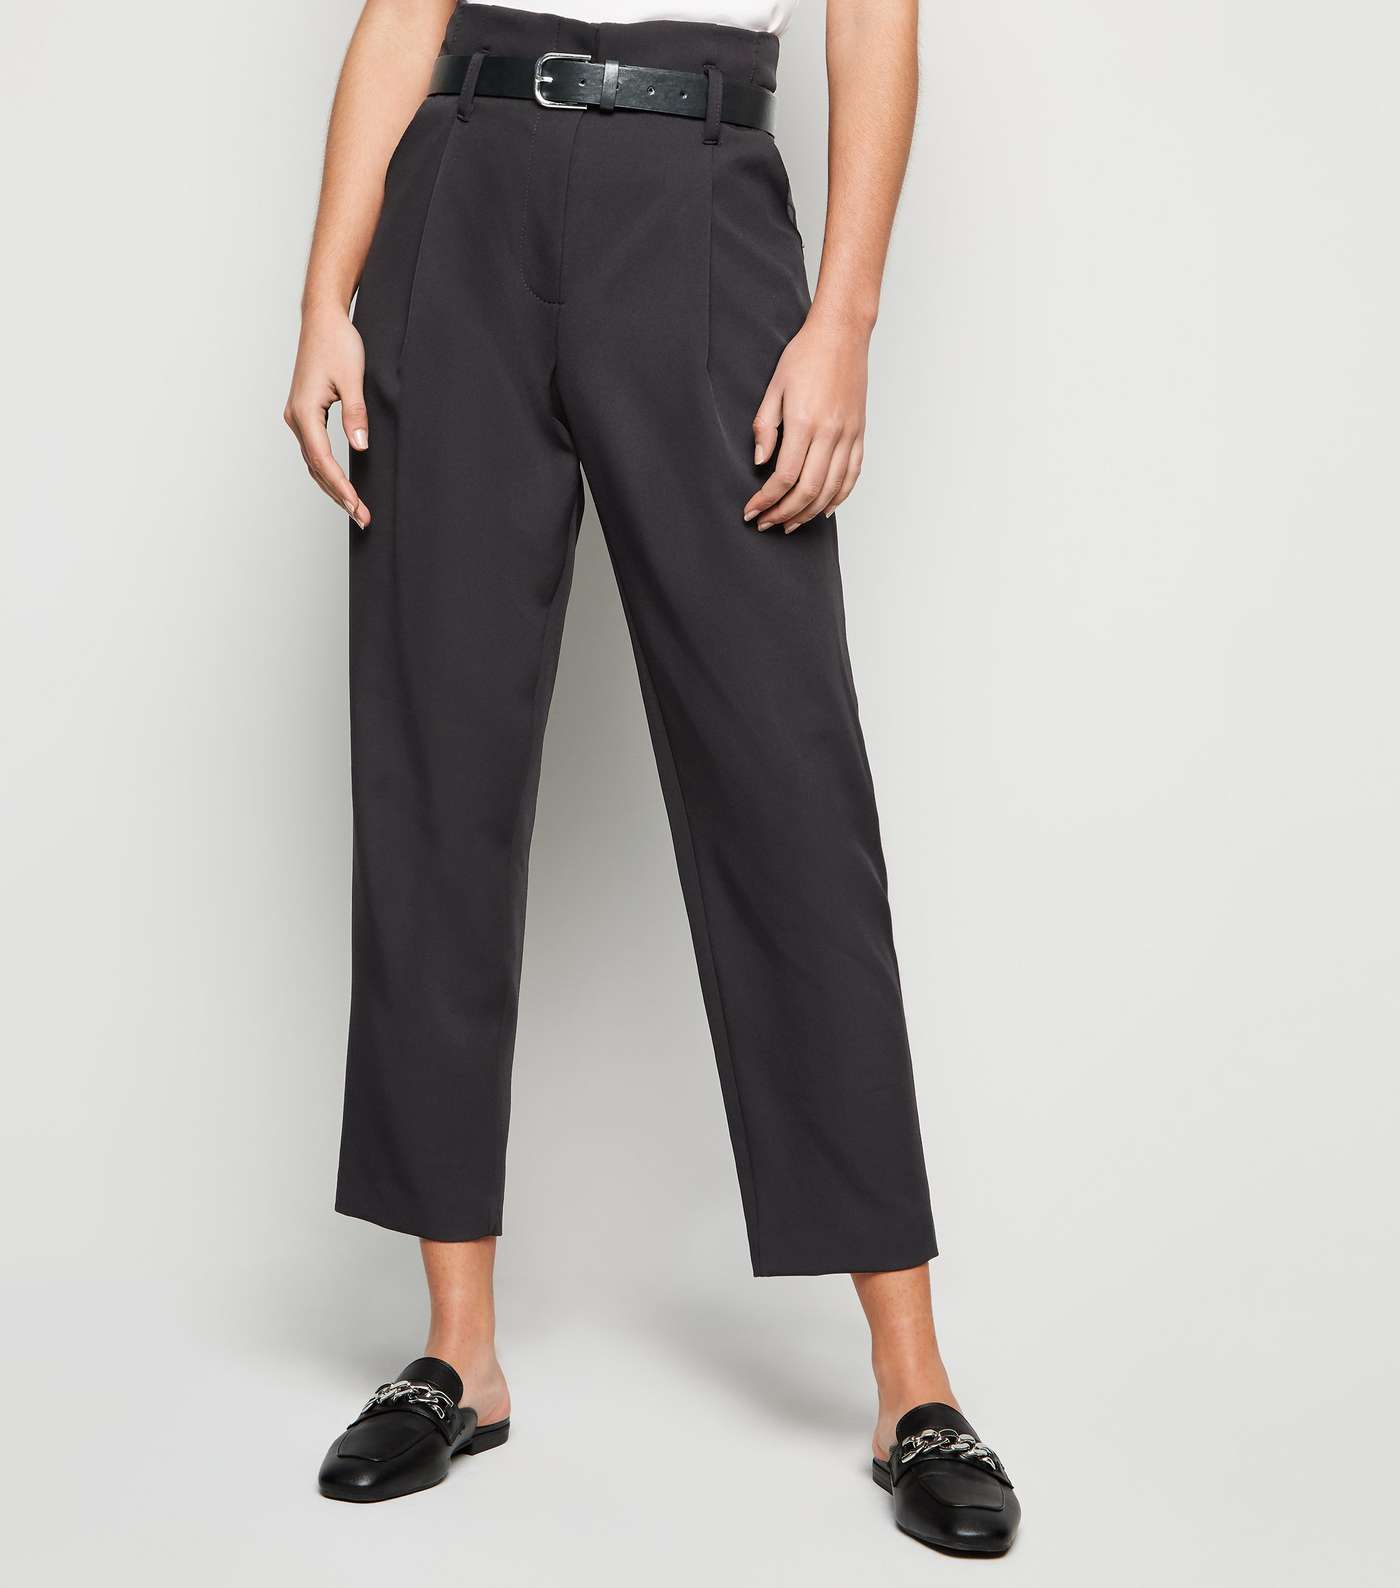 Black Belted High Waist Trousers Image 2